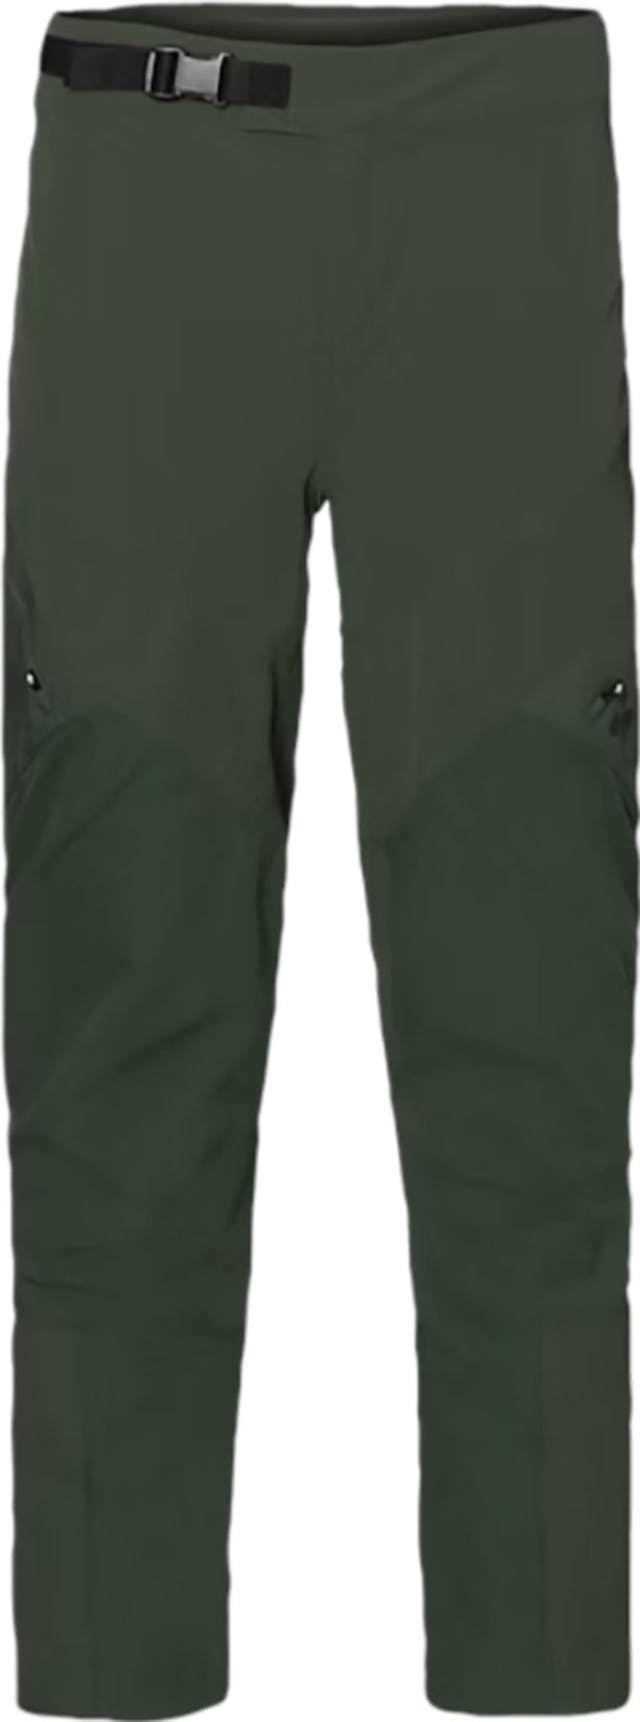 Product image for Hunter Pants - Men's